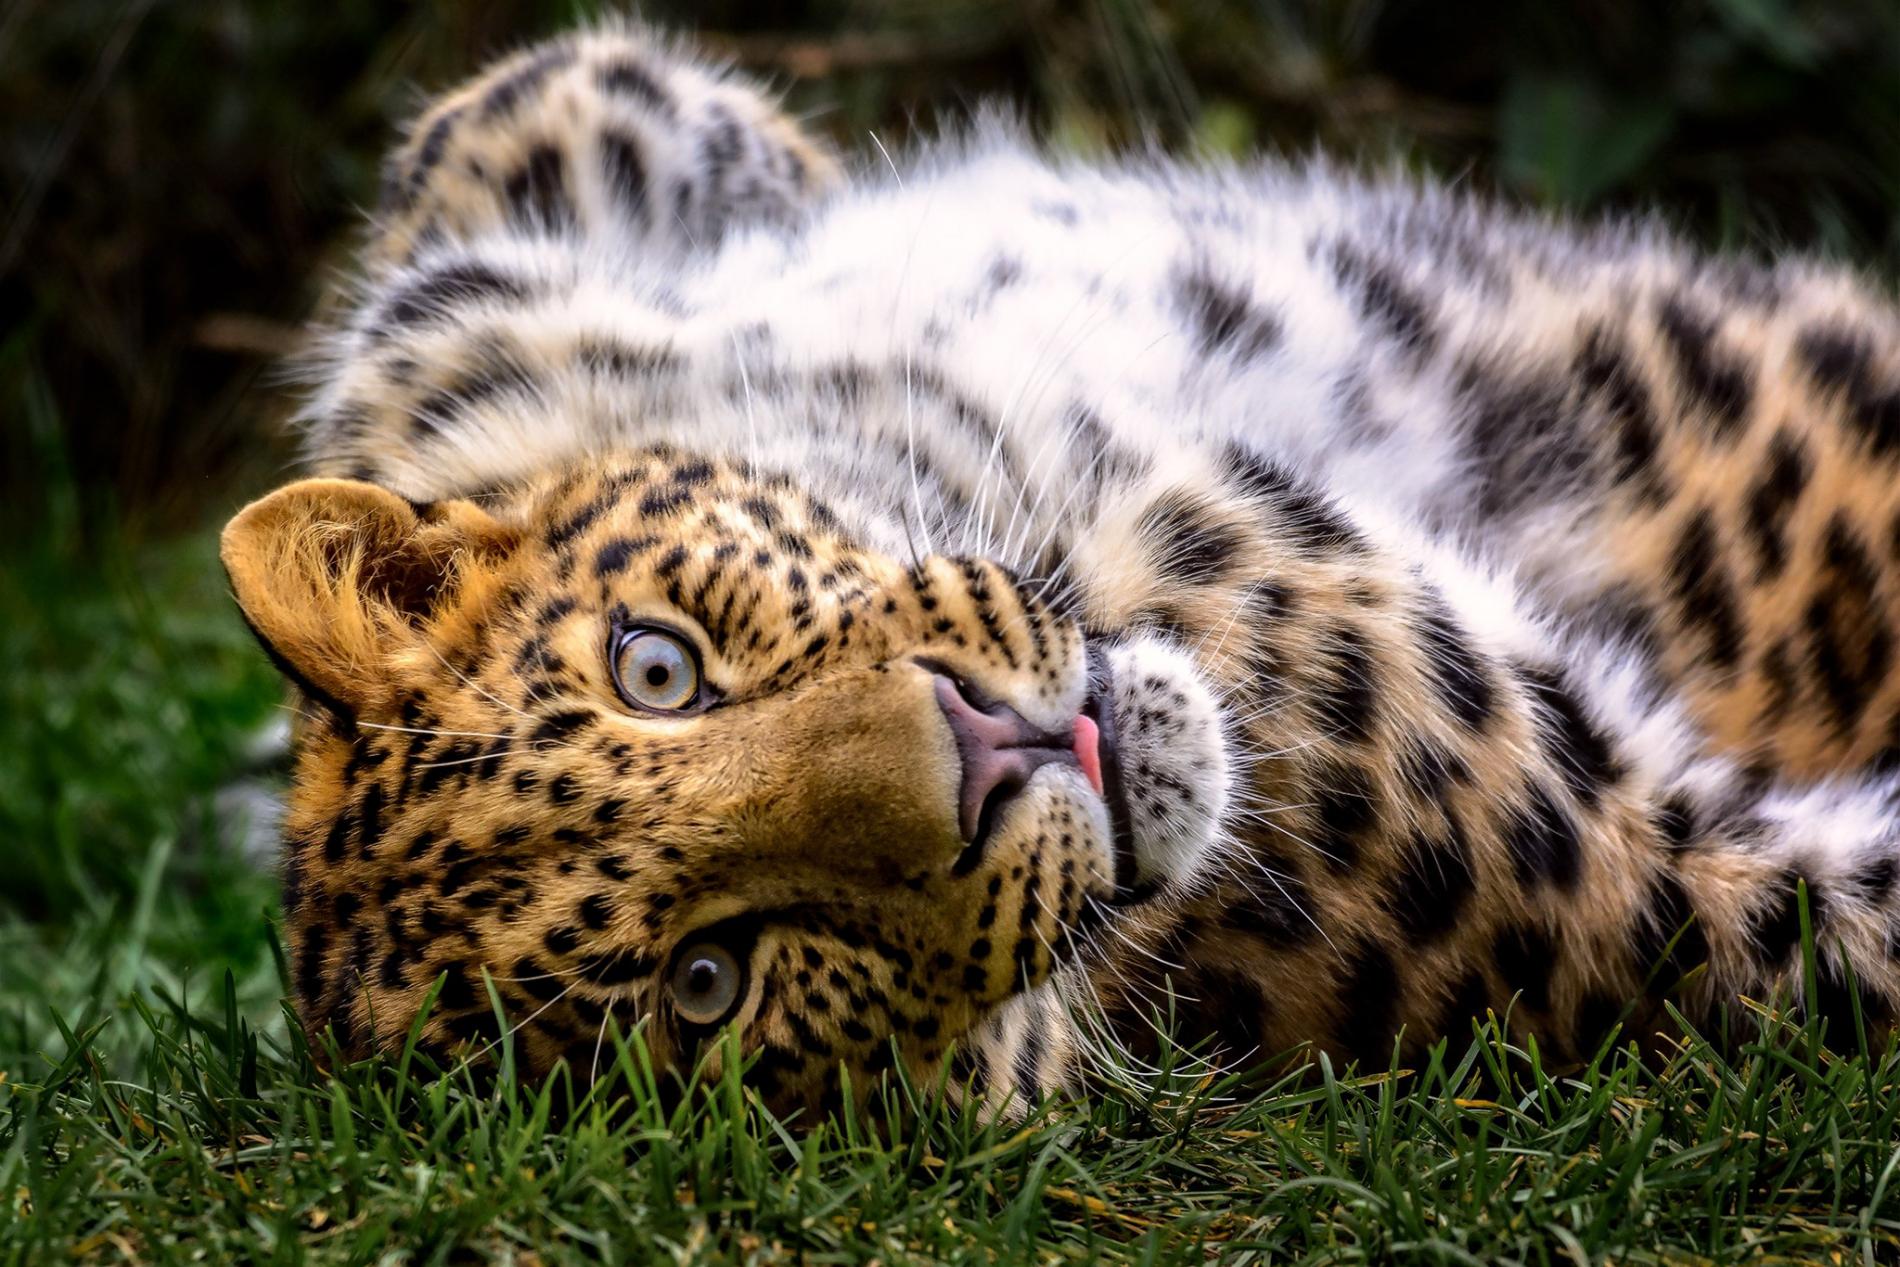 Stunning Wildlife Pictures in Honor of World Animal Day